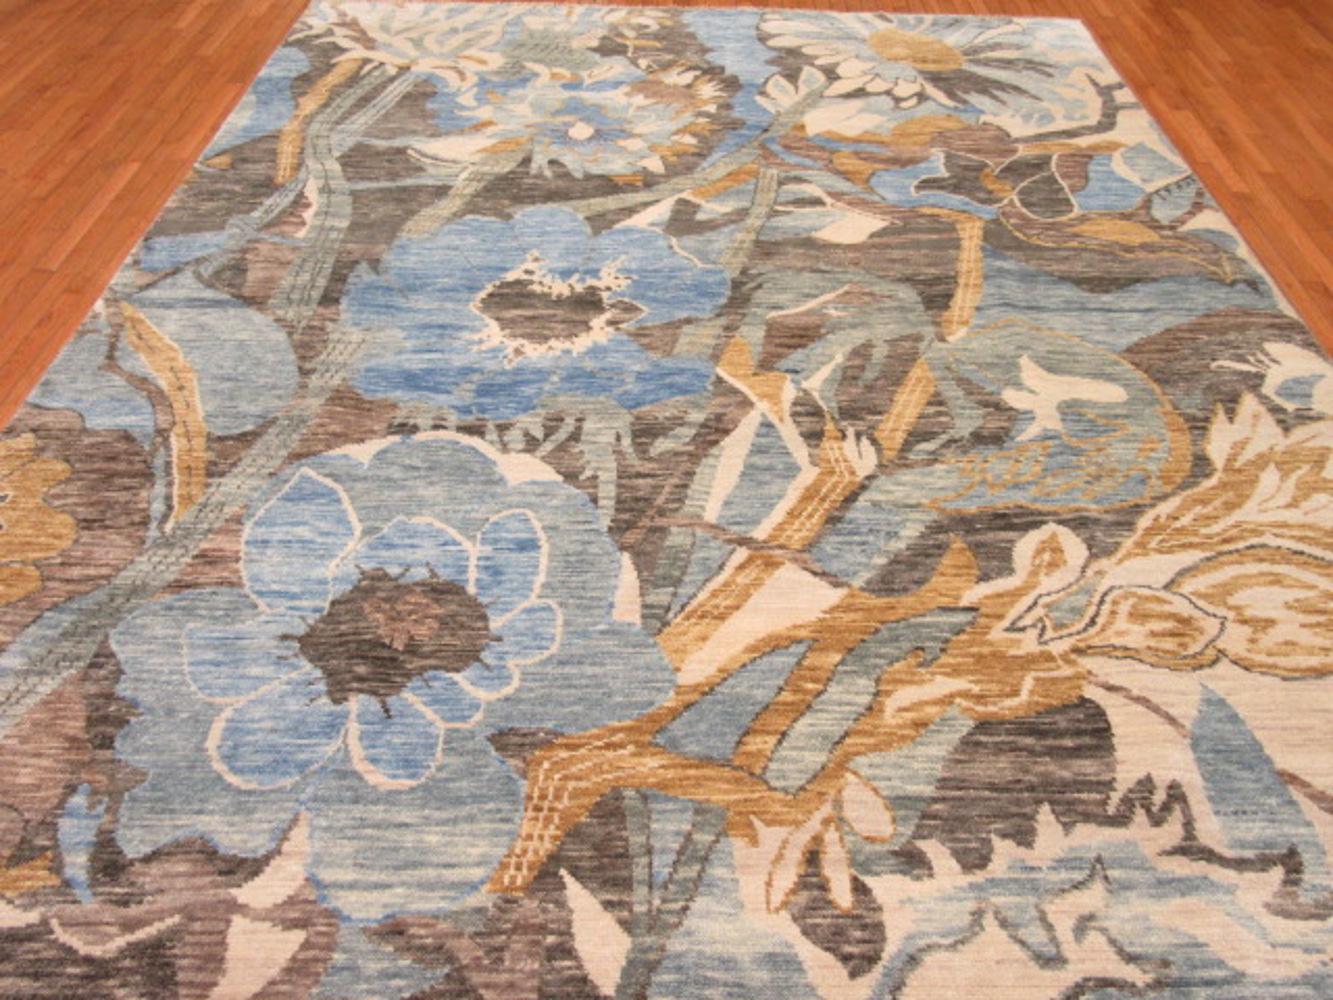 This is a new handmade rug in India with a large-scale modern contemporary design. It is made with wool on cotton foundation. The rug measures: 9' x 12' and in new condition.